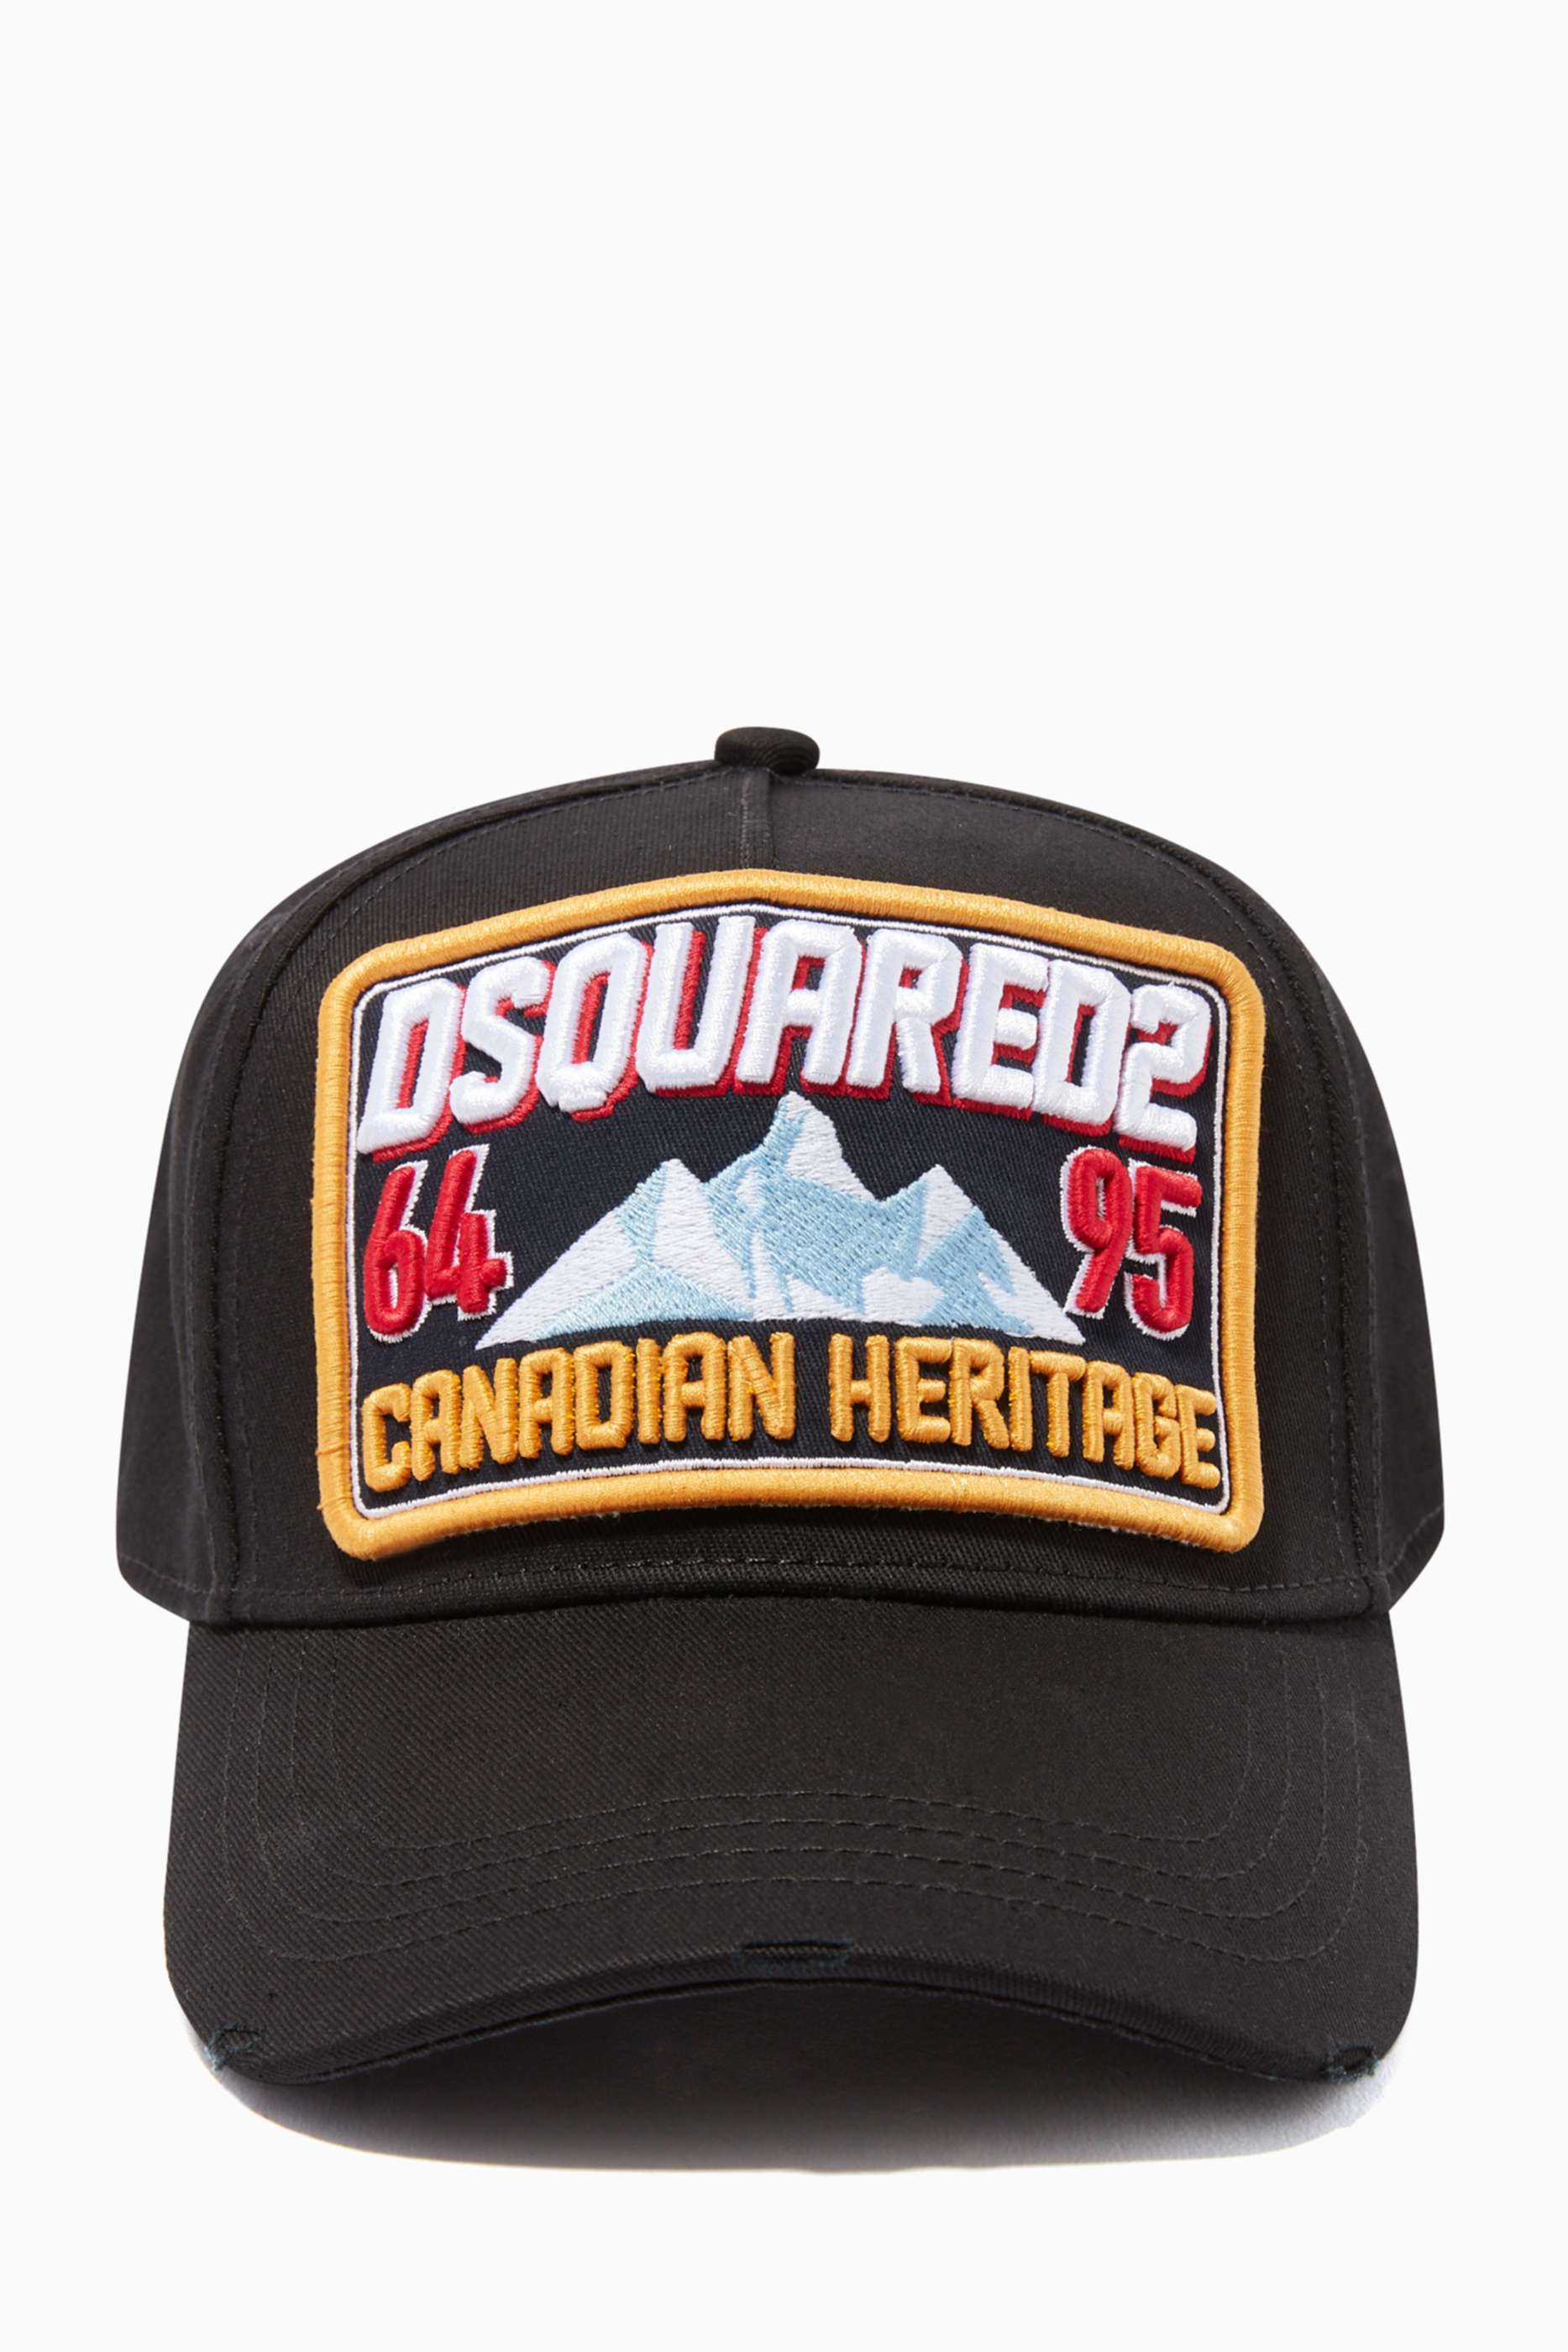 dsquared mountain